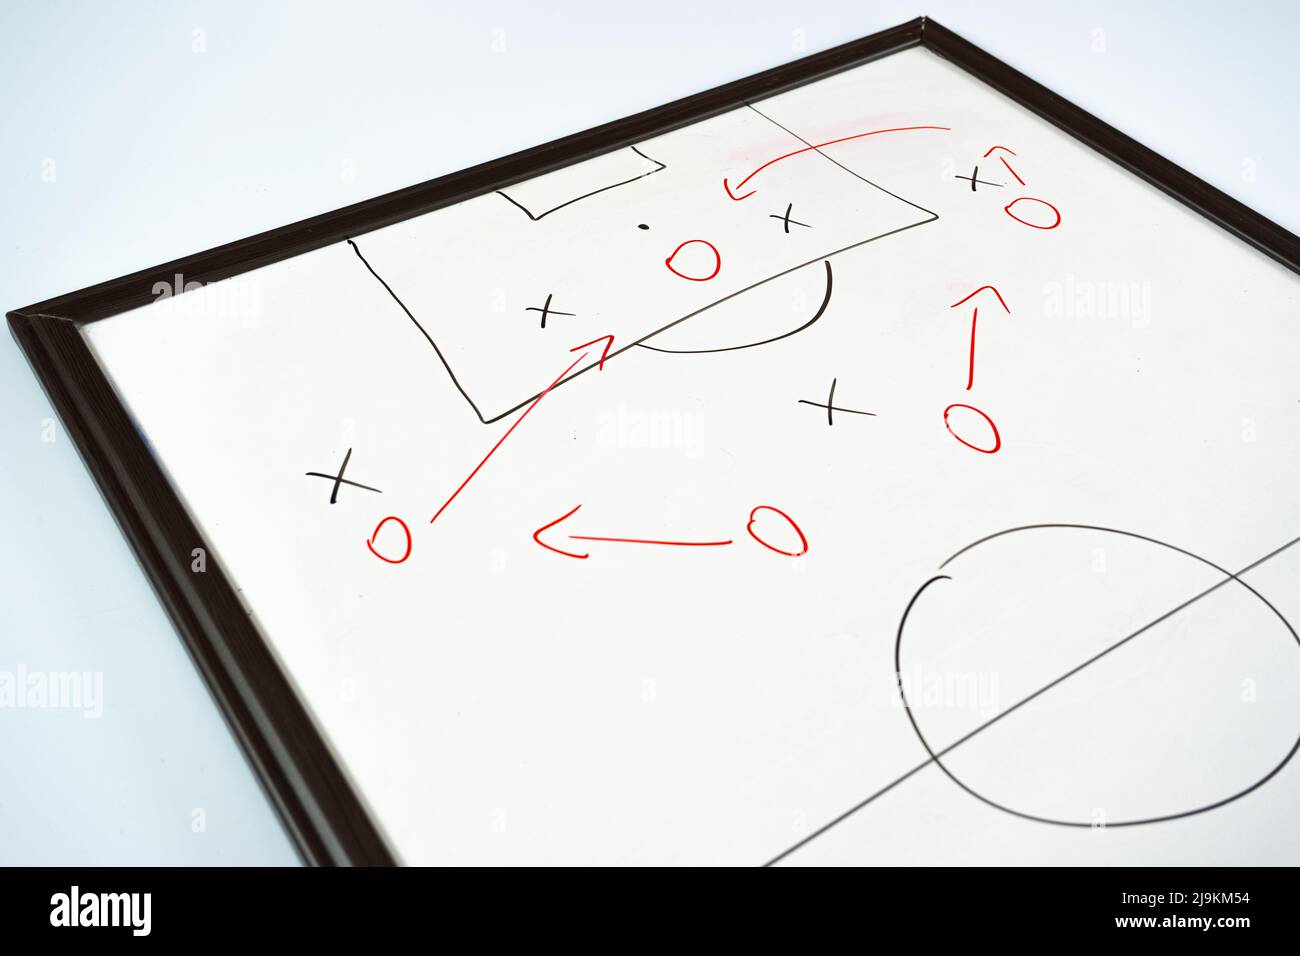 Football tactics with black red color marker on a whiteboard, soccer game strategy, football score plan, playing and attack idea, training concept Stock Photo